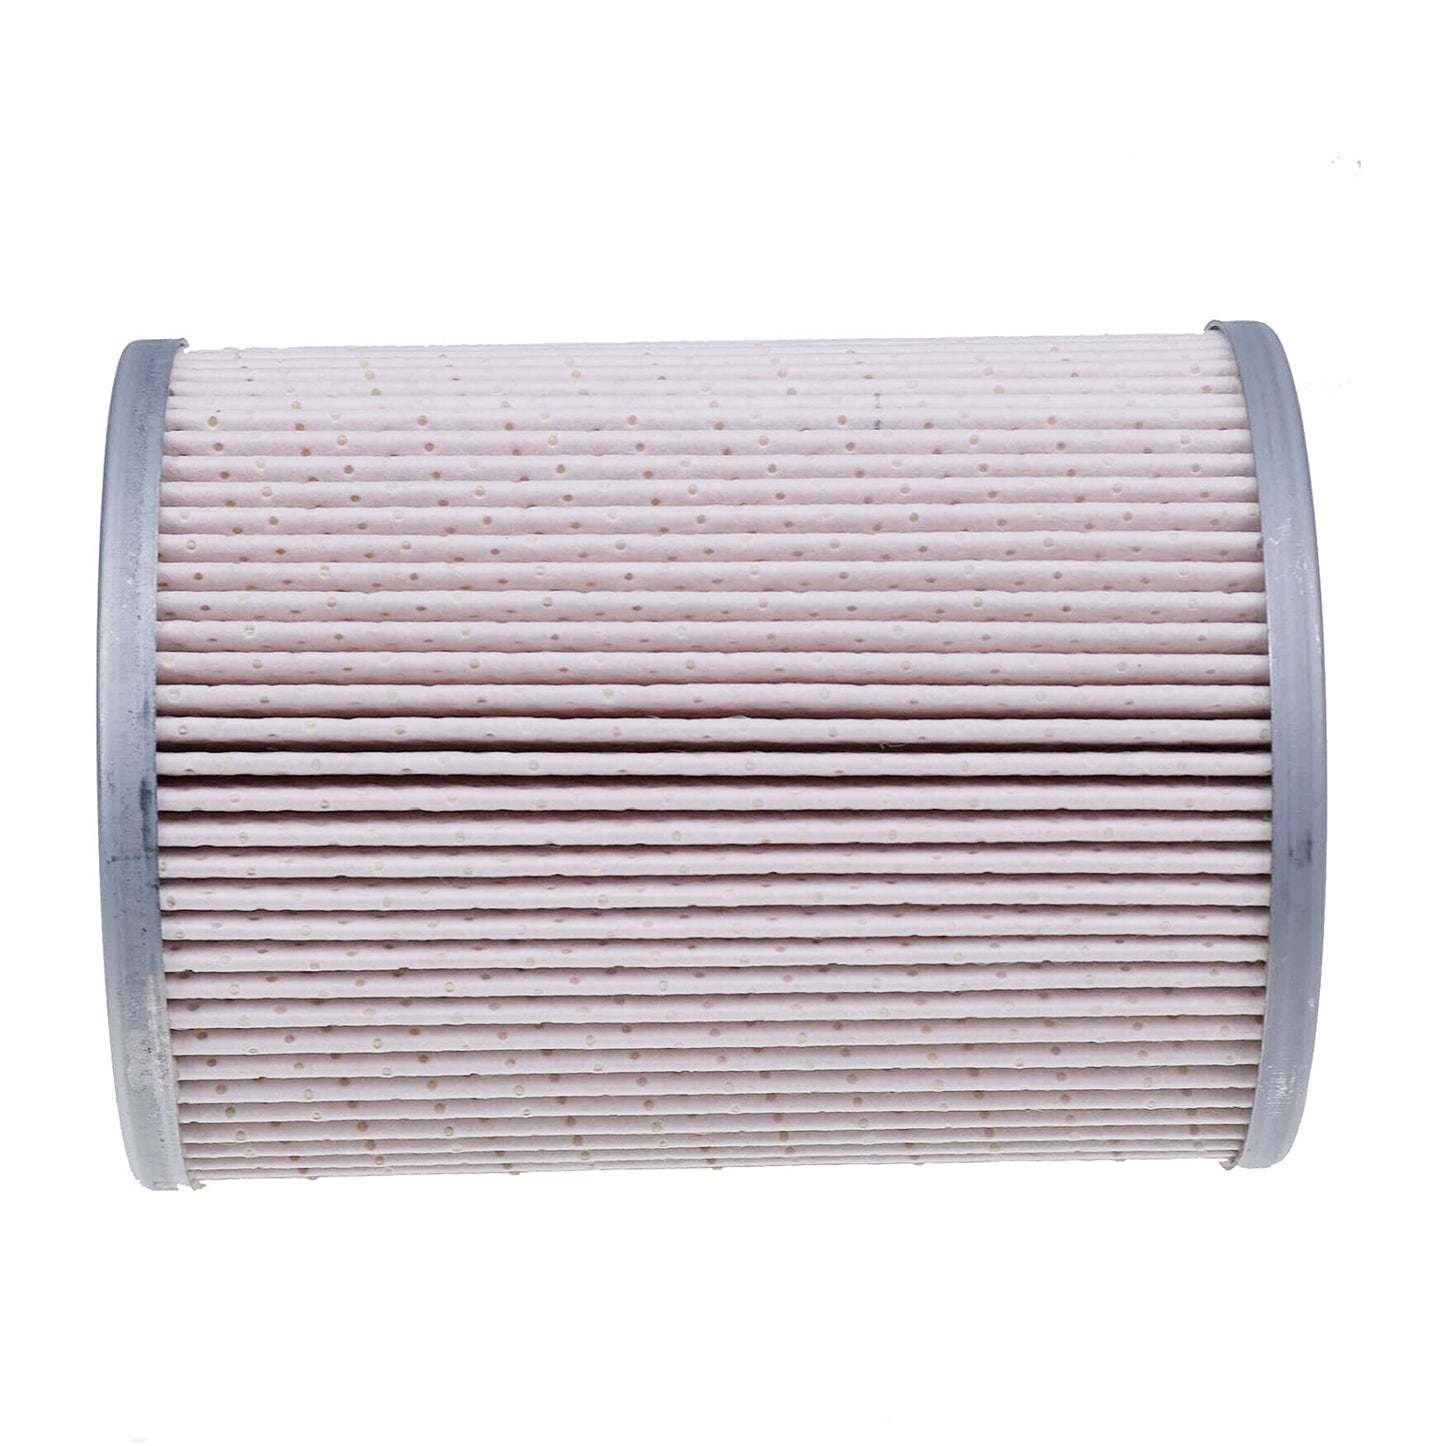 New MIU802421 Fuel Water Separator Filter Element Compatible with John Deere 1570 1575 1585 3033R 3046R 3032E 3038E 3046R 4044M 4052R 4066R